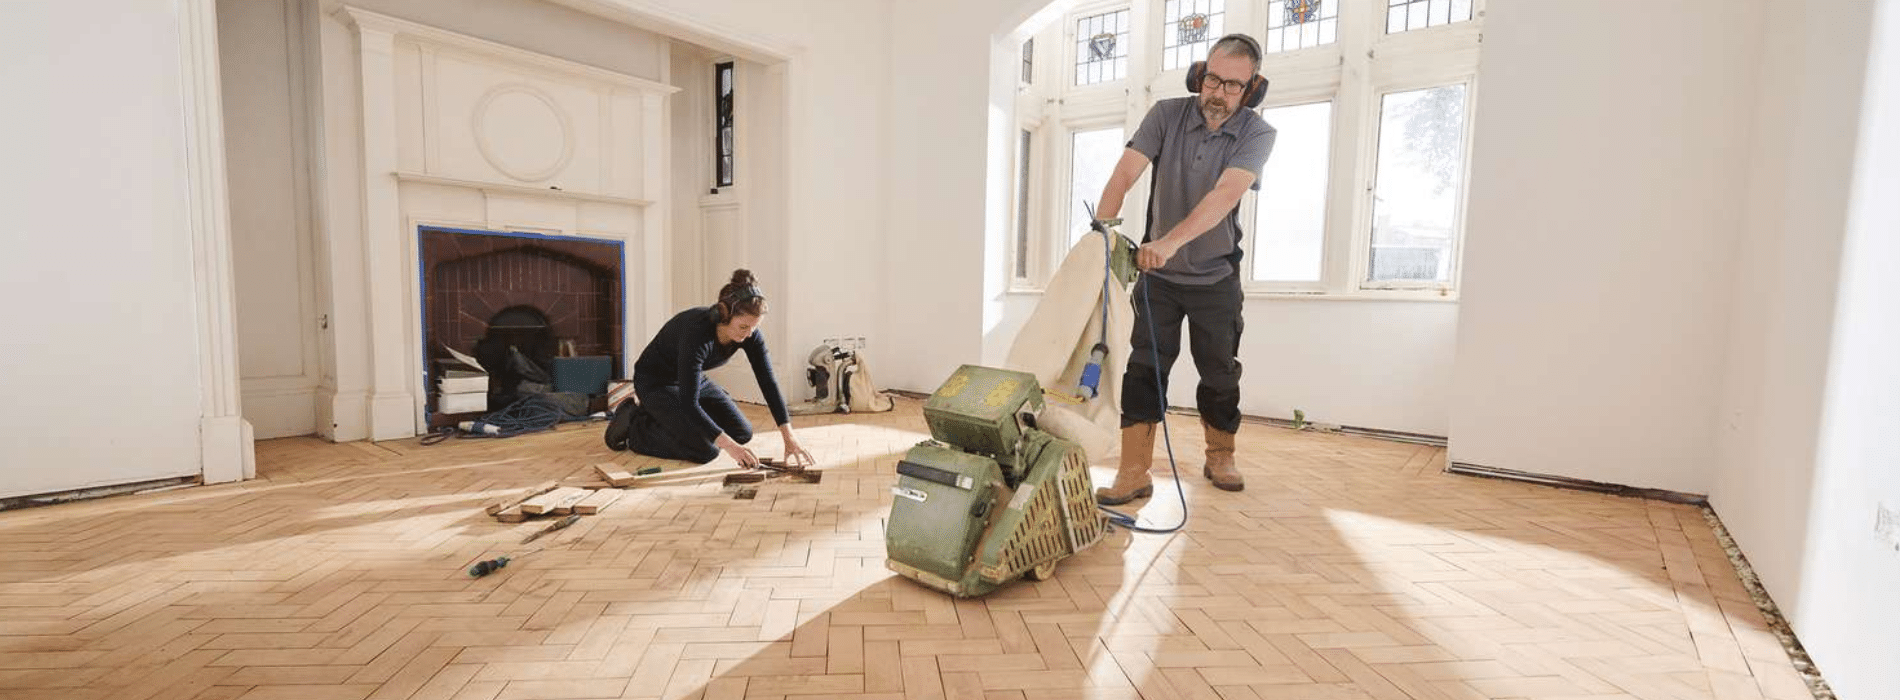 Professional team from Mr Sander® in Teddington, TW11, using a 1900-effect Bona belt sander with a dimension of 407mm, voltage 230, frequency 5060, to meticulously restore a herringbone floor while ensuring a dust-free environment with a HEPA filtration system.